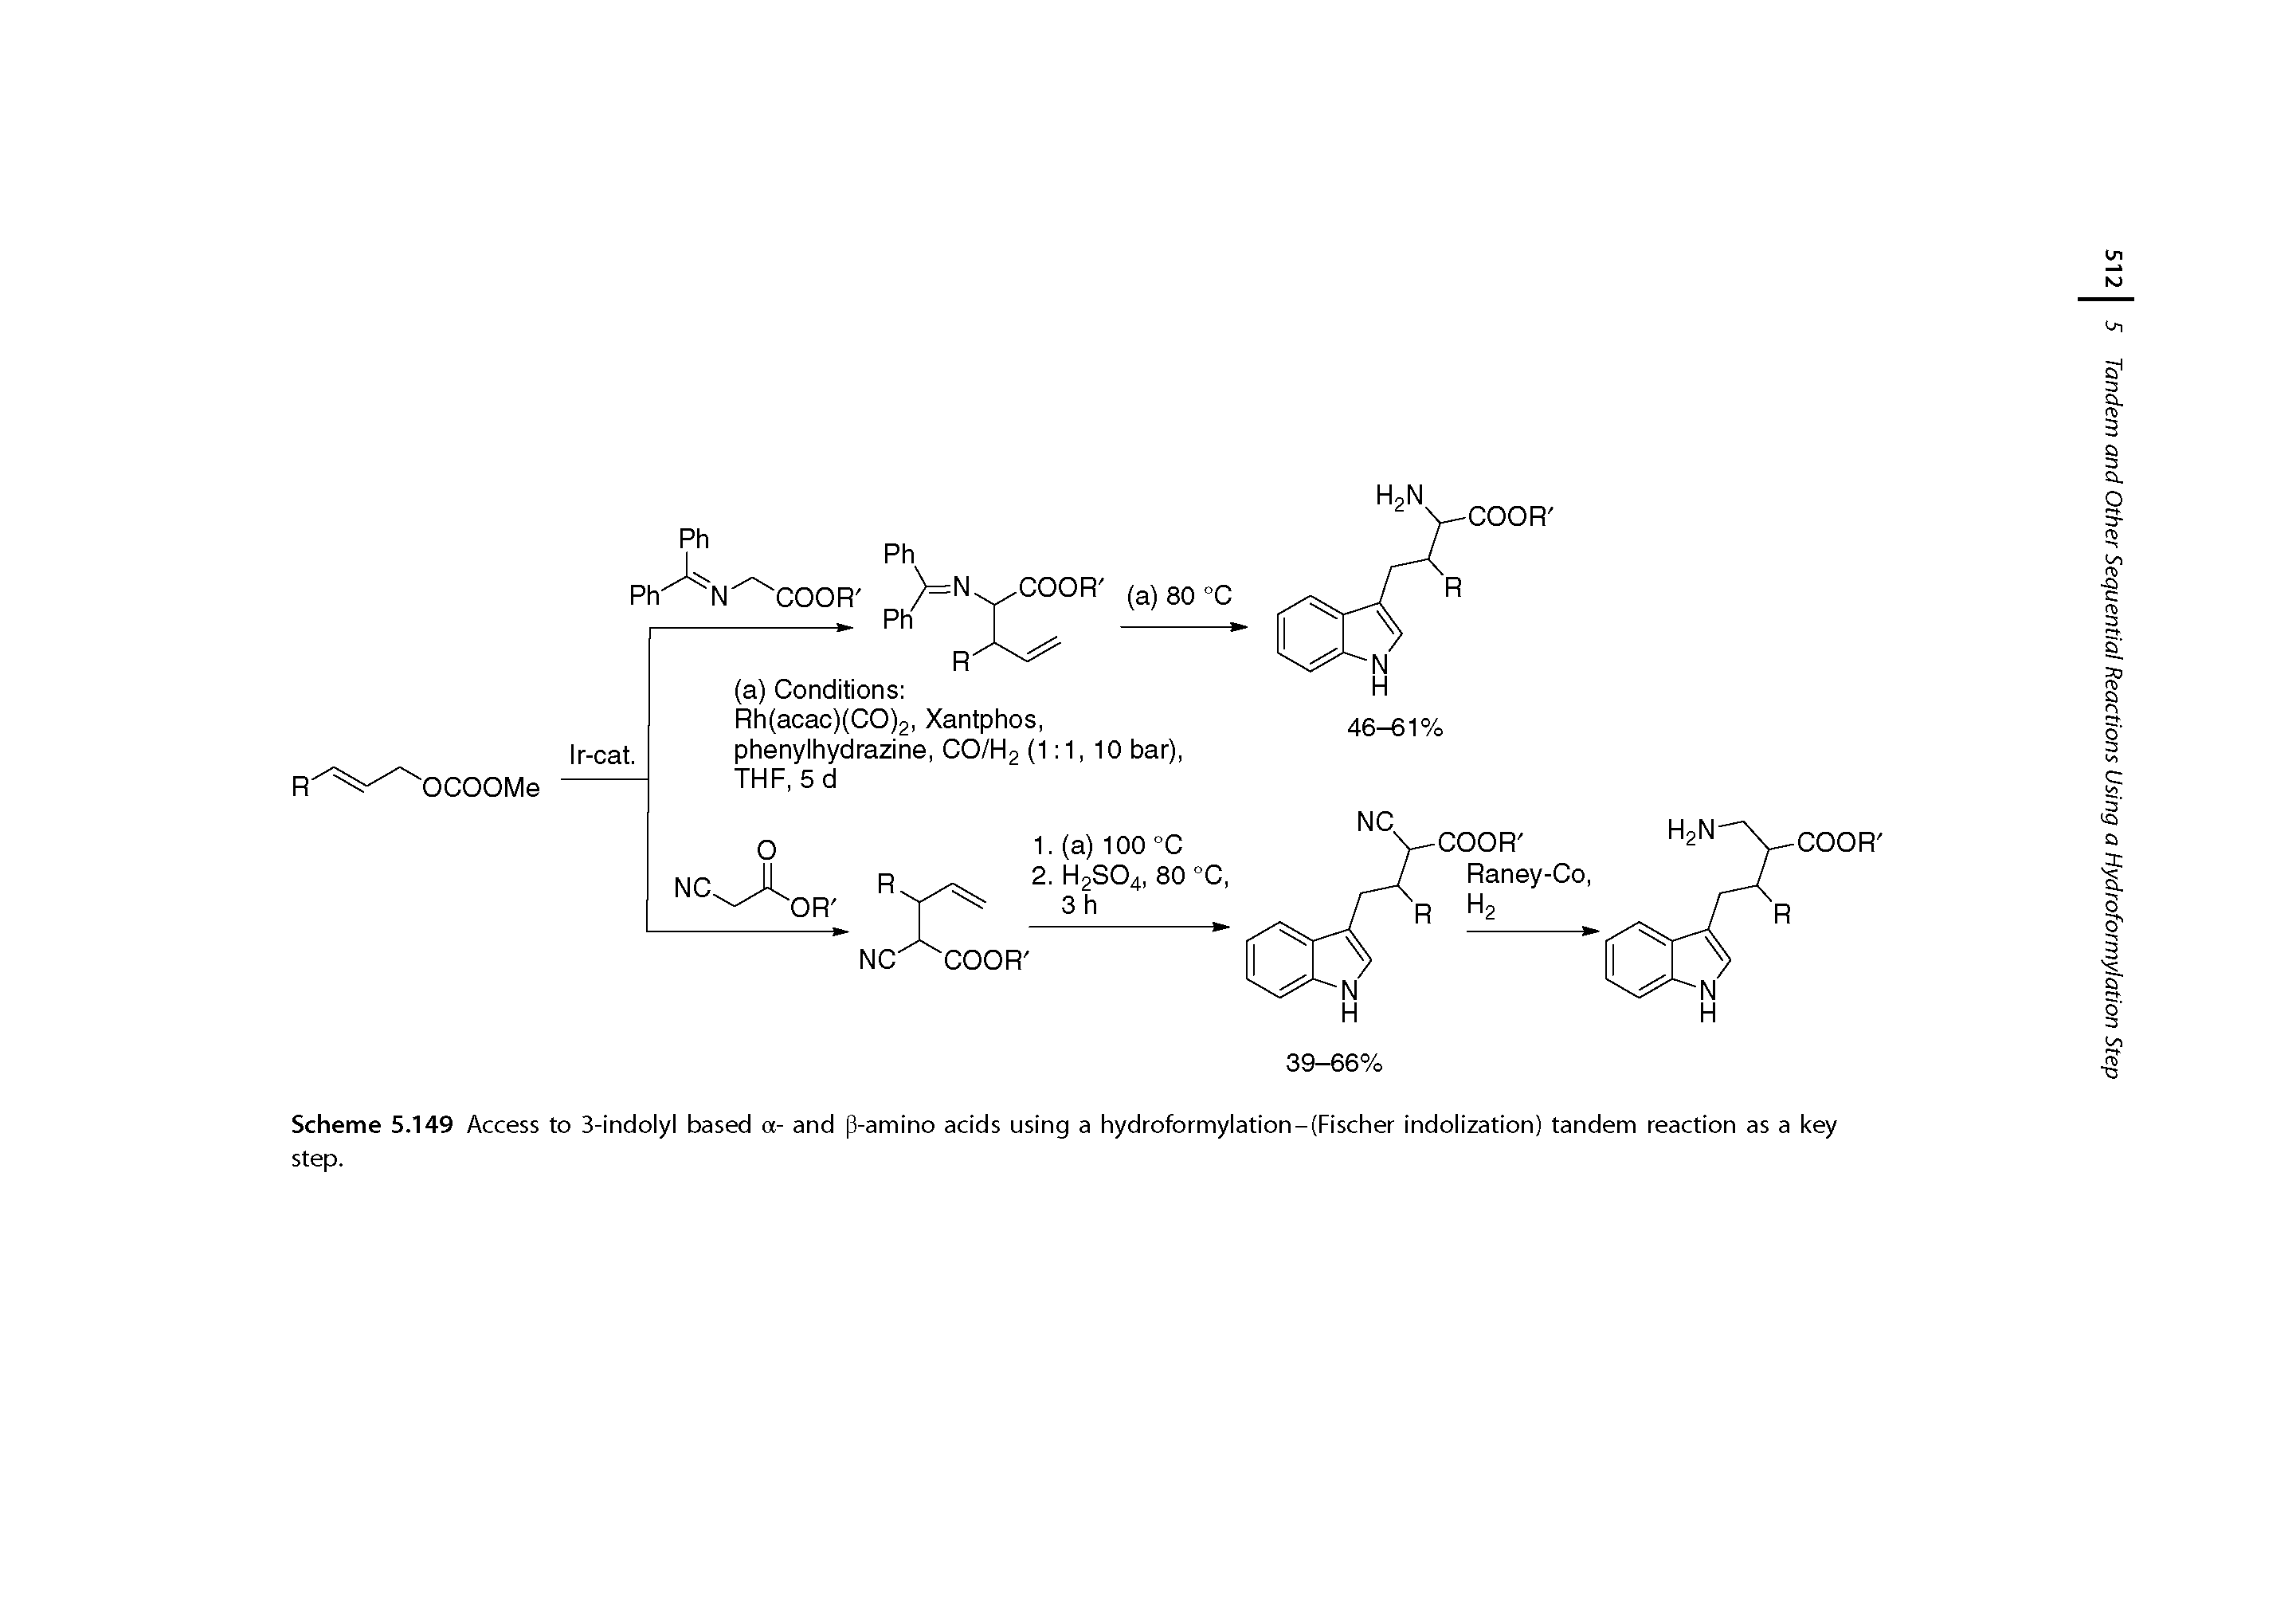 Scheme 5.149 Access to 3-indolyl based a- and p-amino acids using a hydroformylation-(Fischer indolization) tandem reaction as a key step.